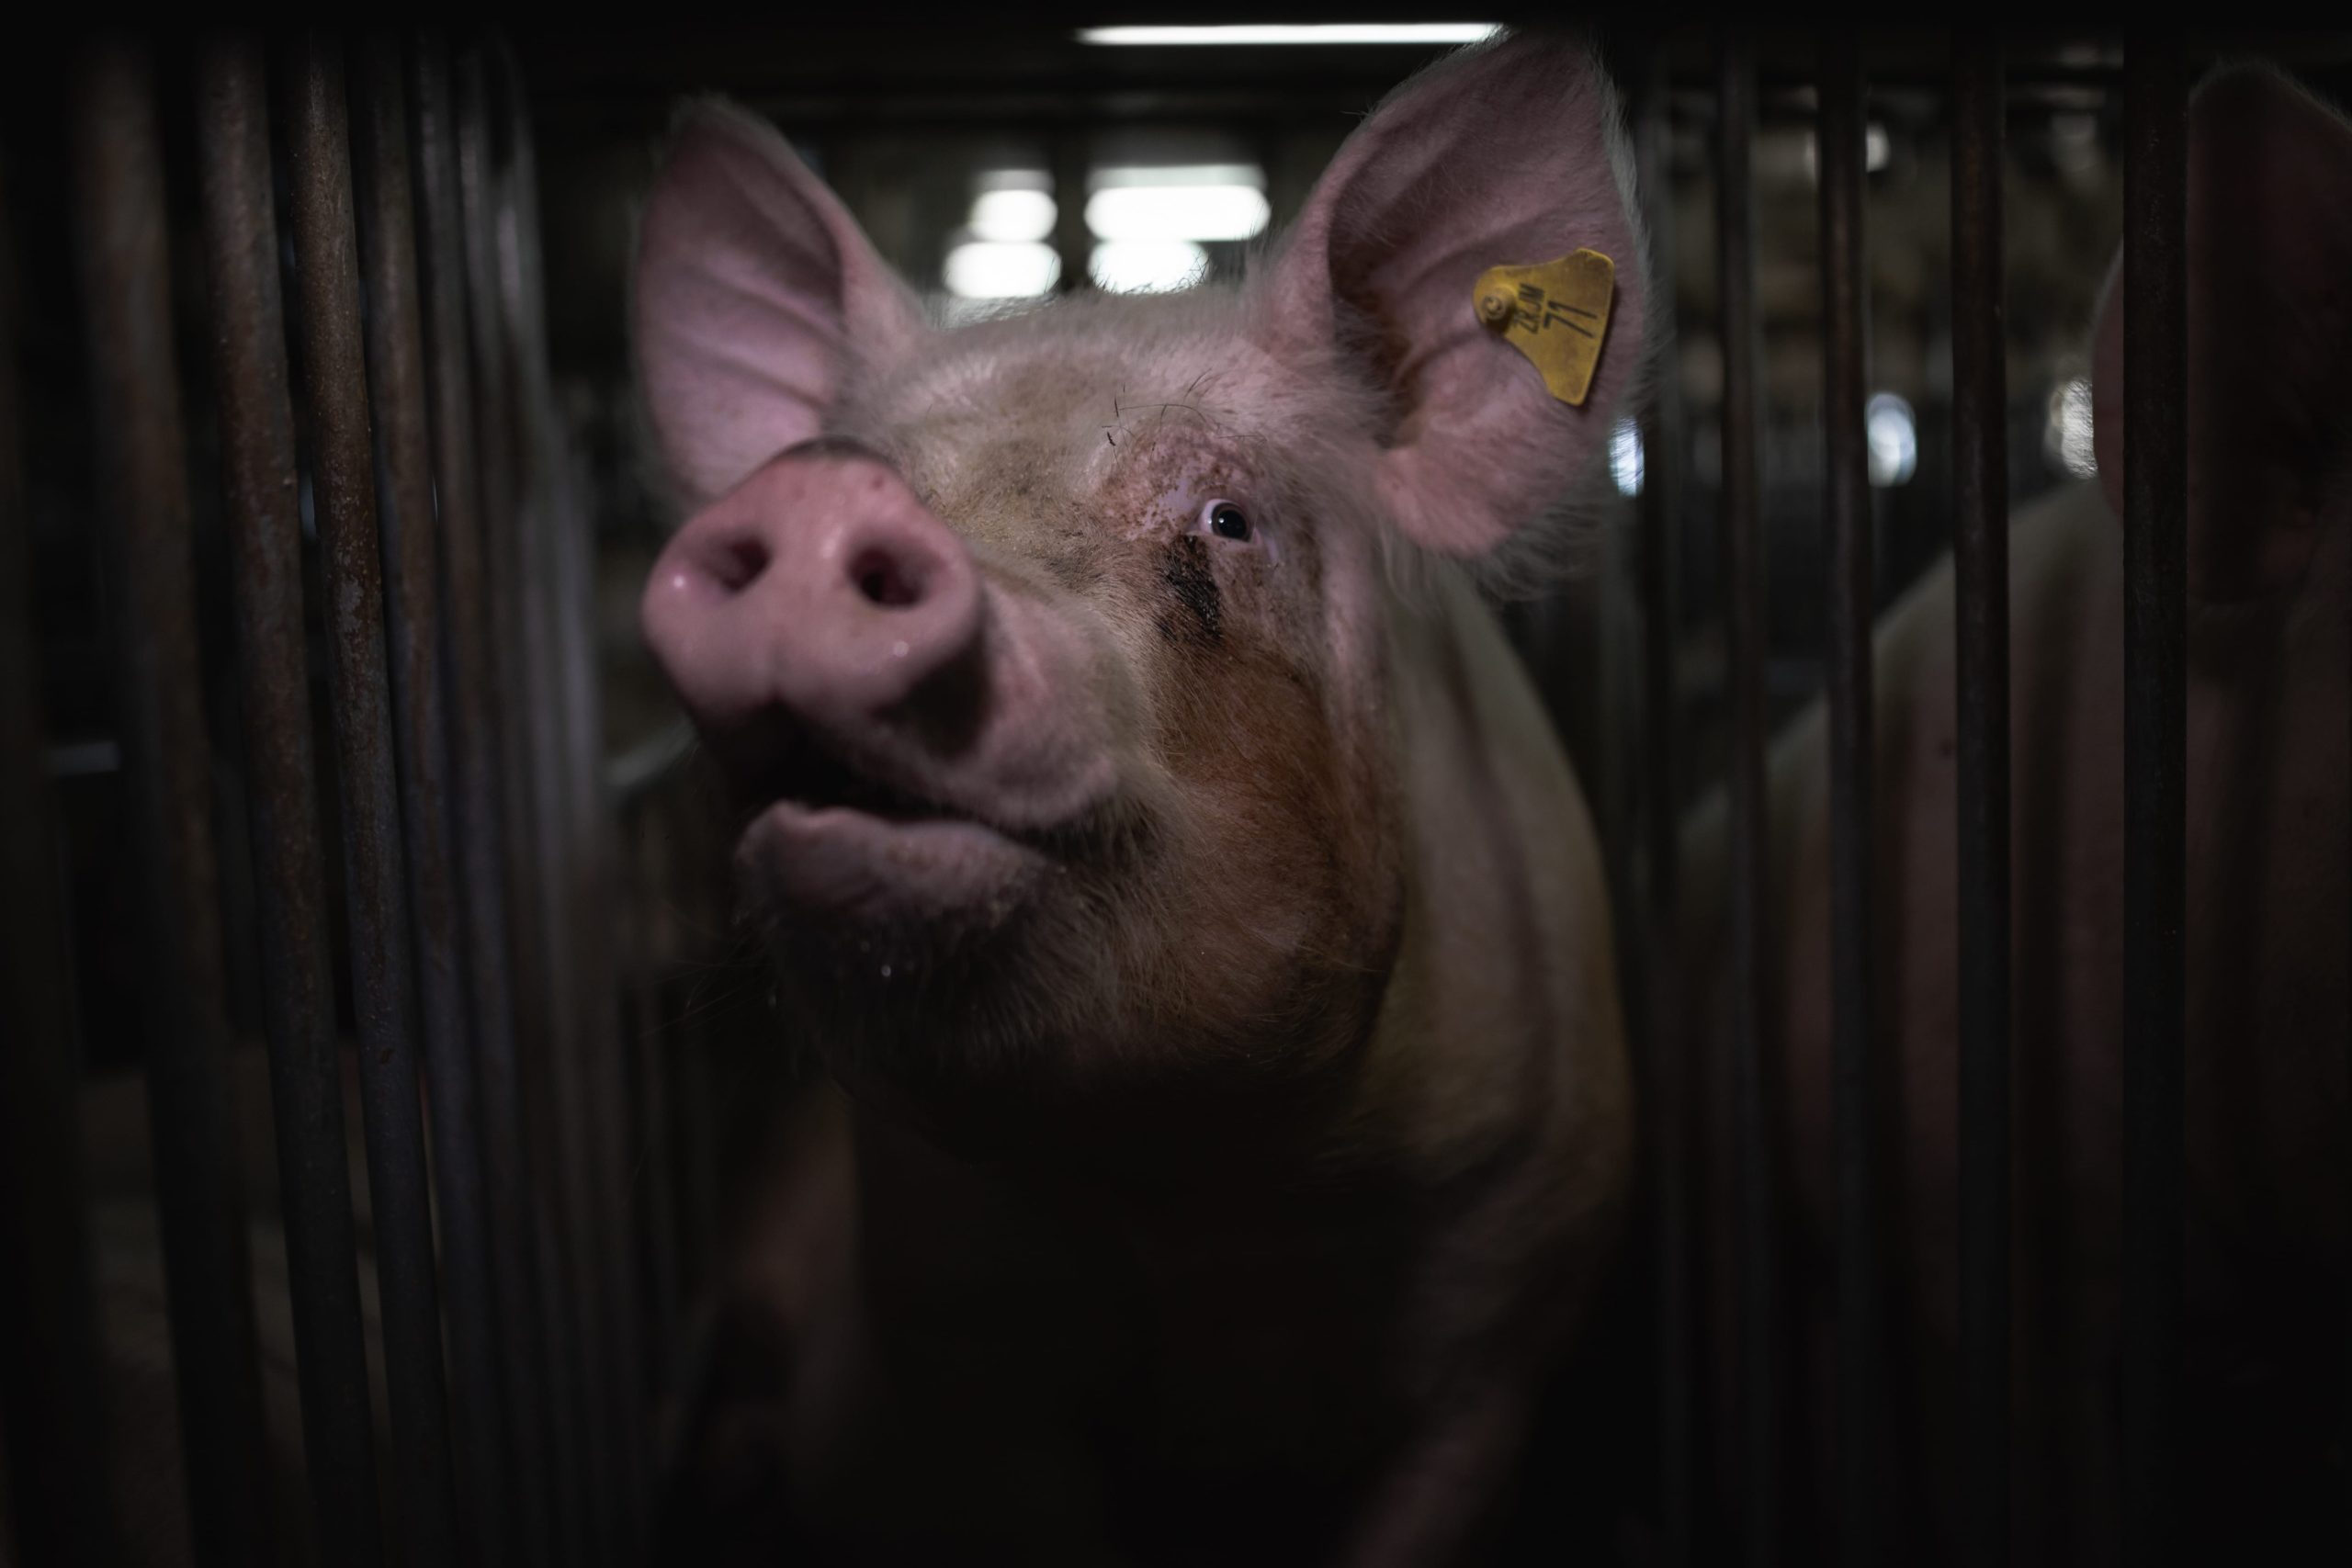 Image shows pig in factory farm